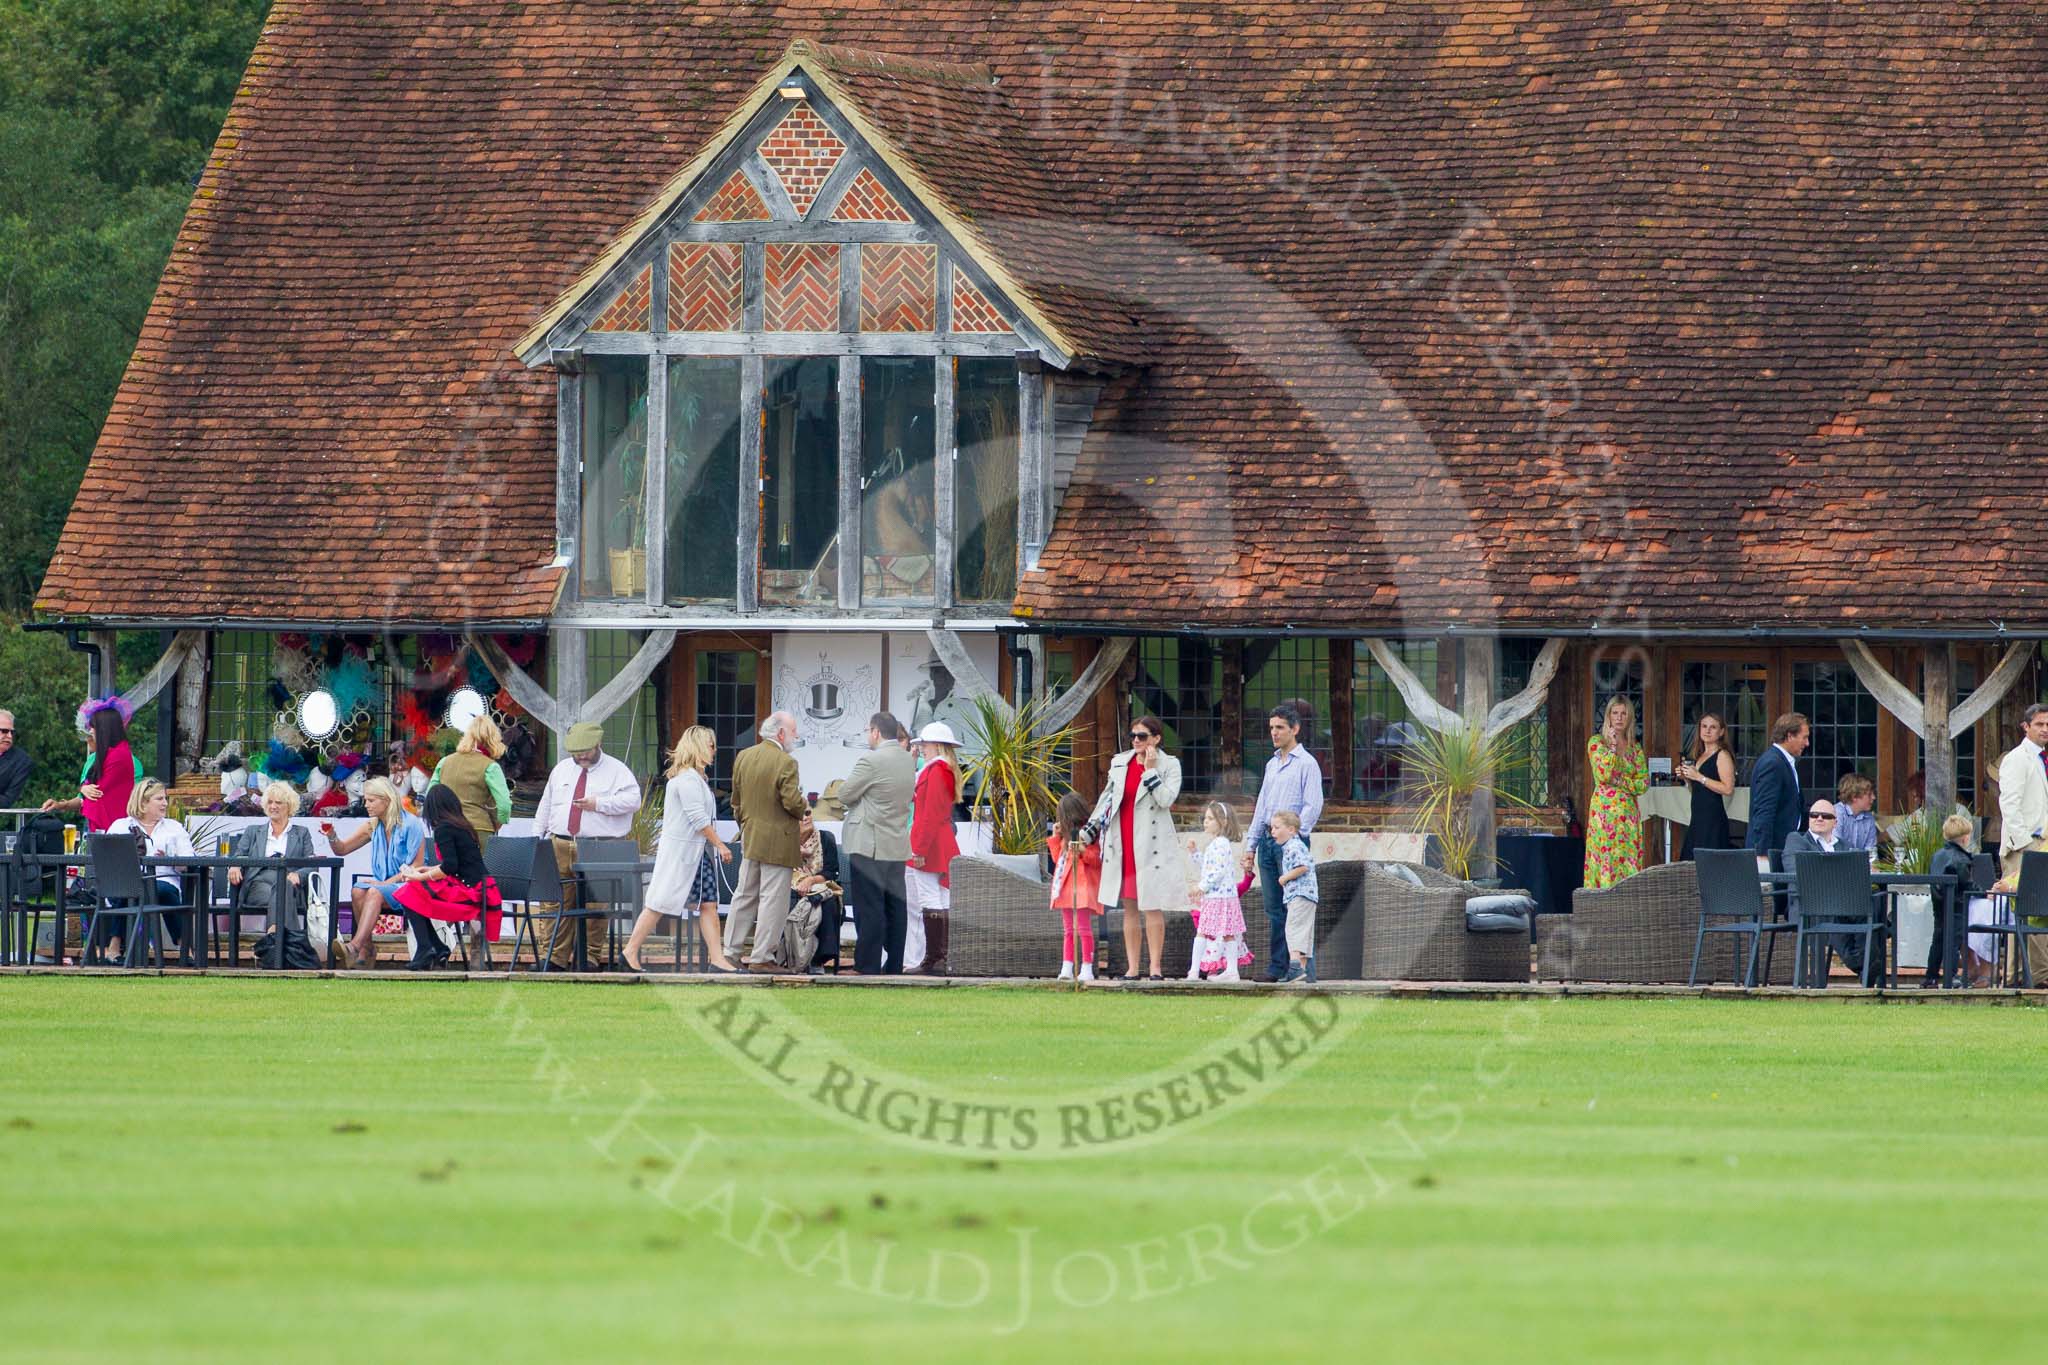 7th Heritage Polo Cup finals: The clubhouse of Hurtwood Park Polo Club..
Hurtwood Park Polo Club,
Ewhurst Green,
Surrey,
United Kingdom,
on 05 August 2012 at 13:54, image #53